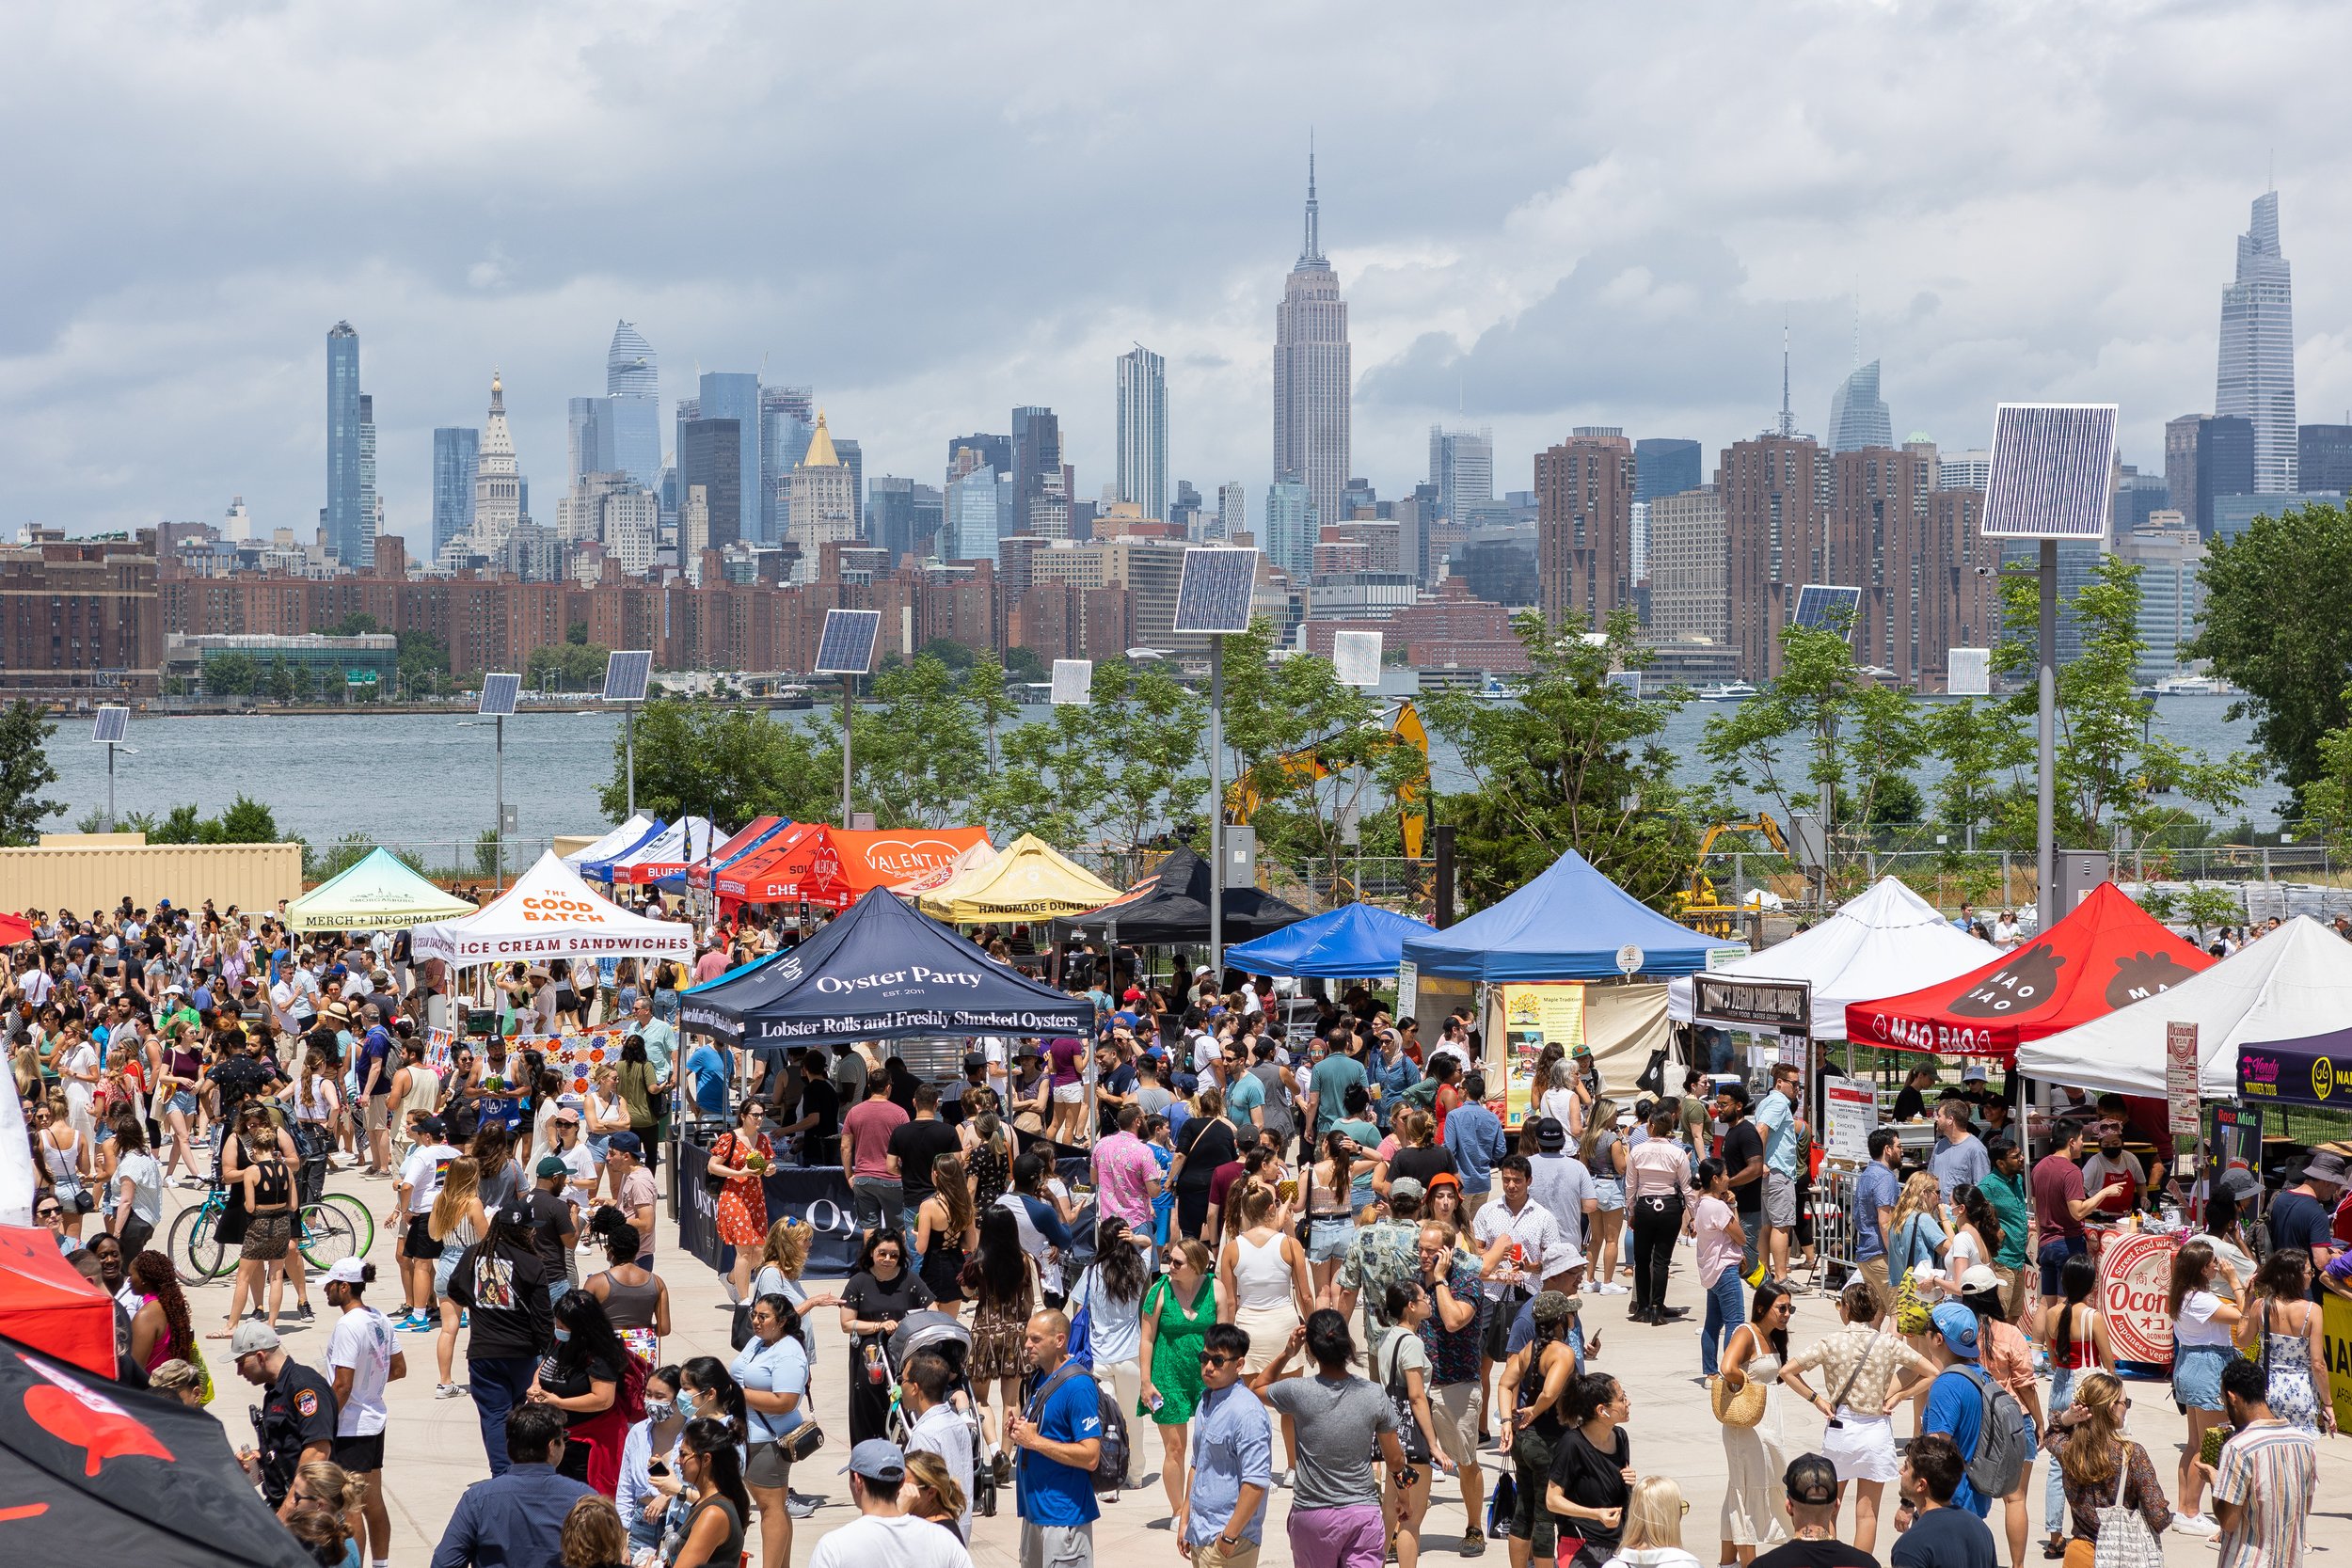 People enjoy themselves at the first Smorgasburg since the pandemic shut it down.